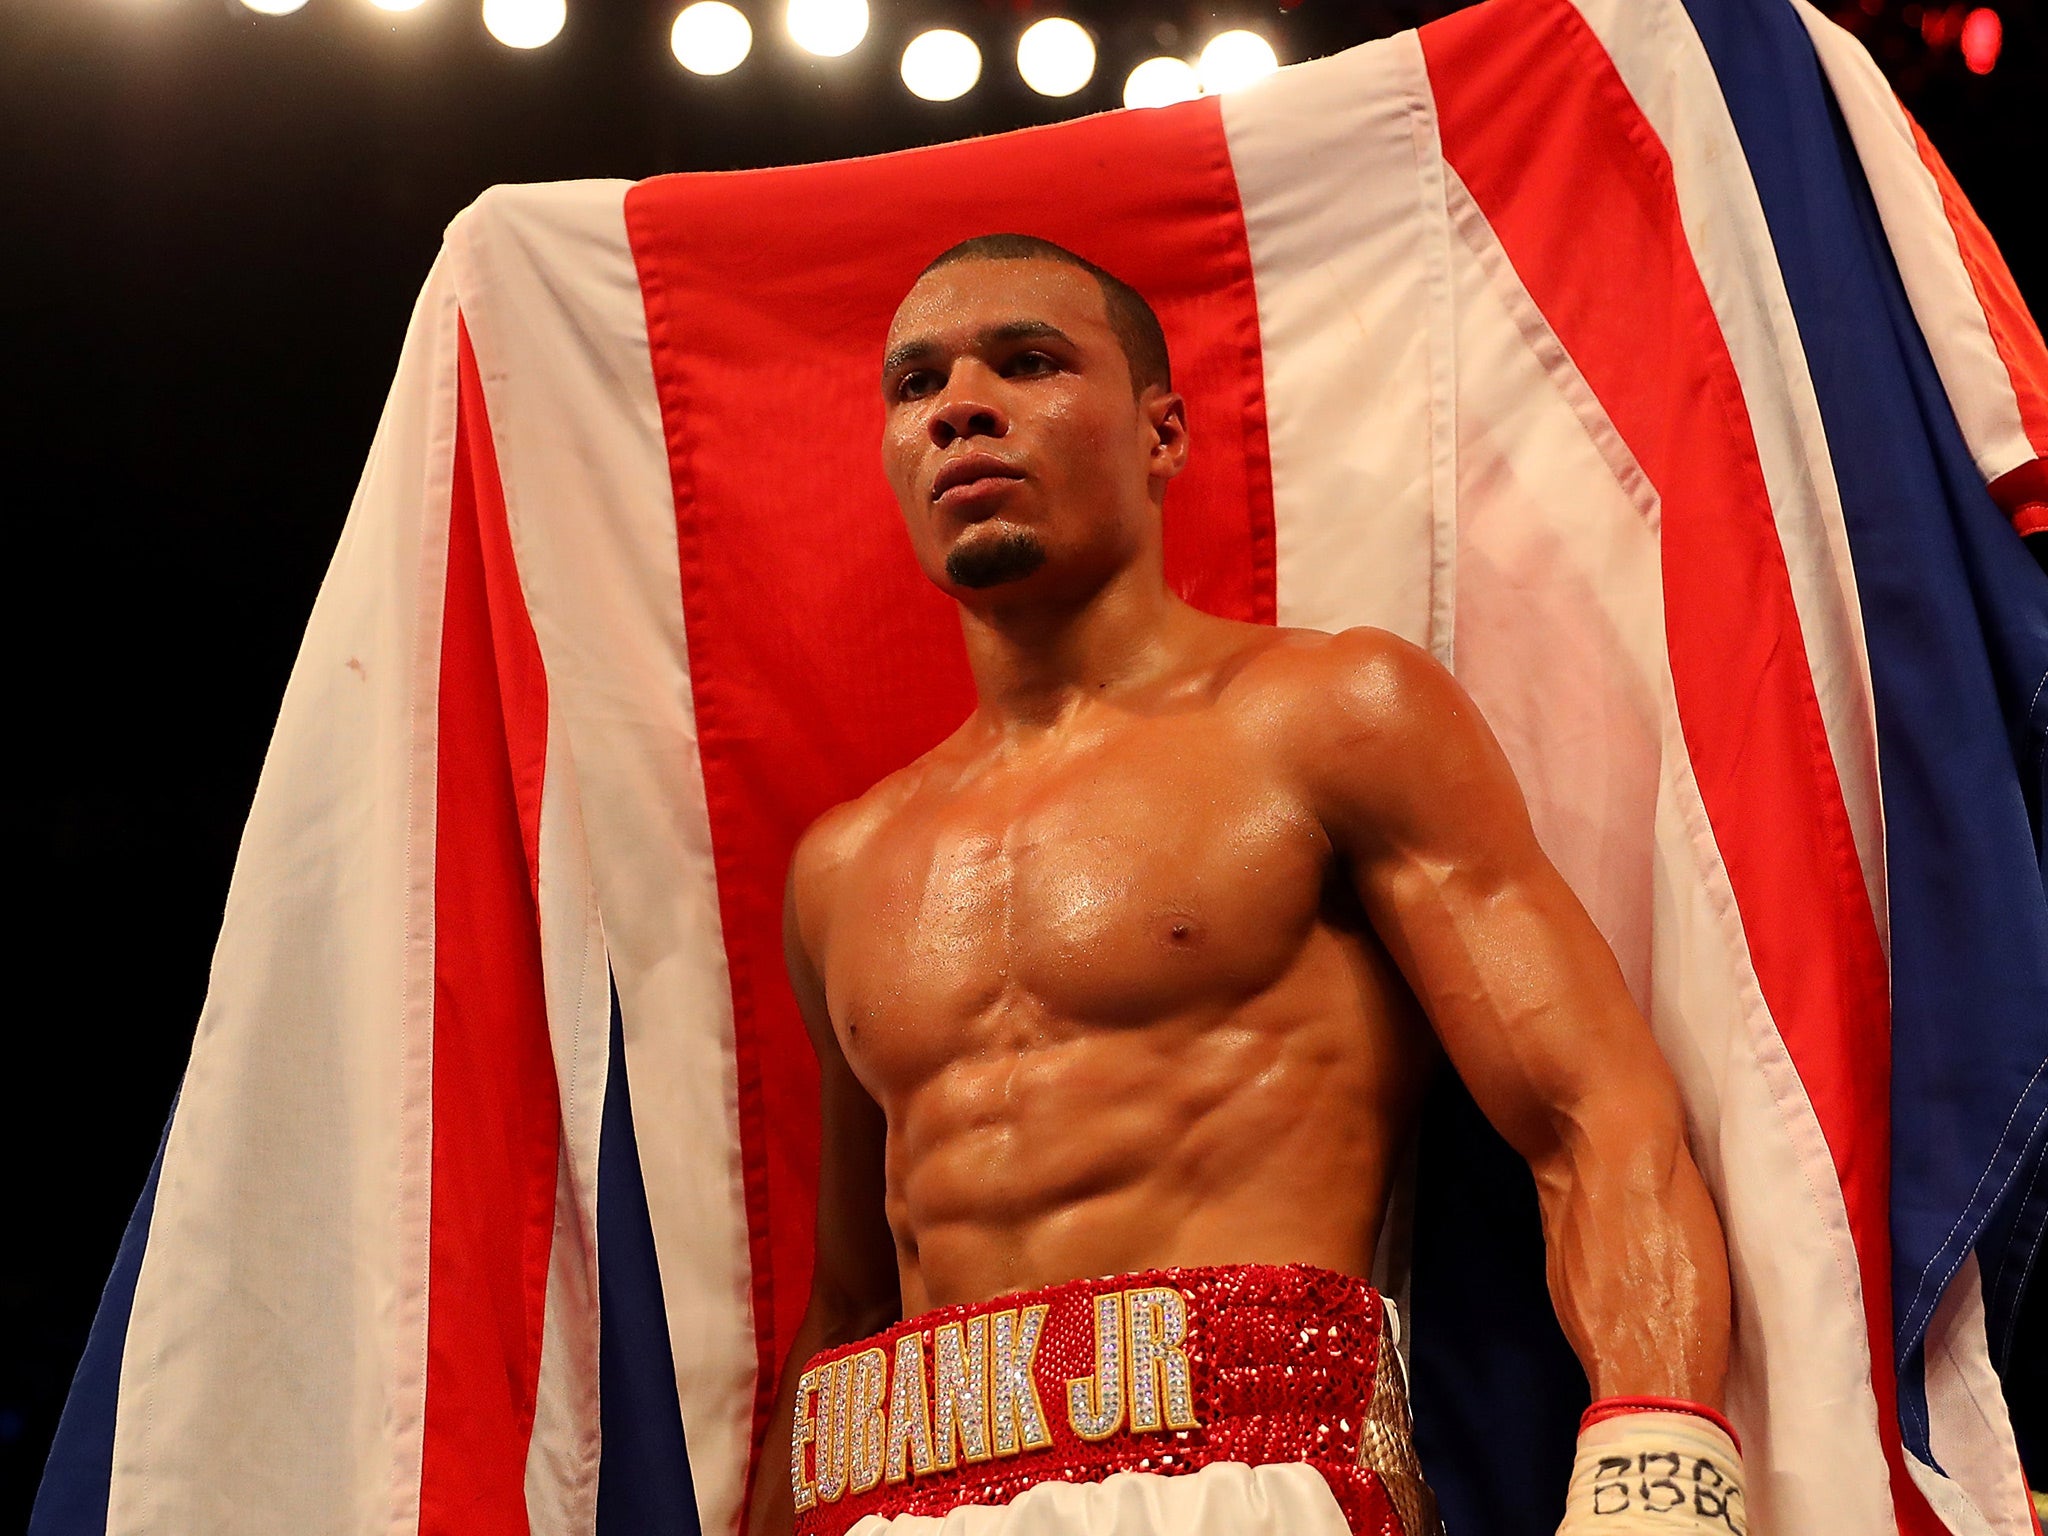 Chris Eubank Jr is currently gearing up for his pay-per-view bout with Renold Quinlan in early February